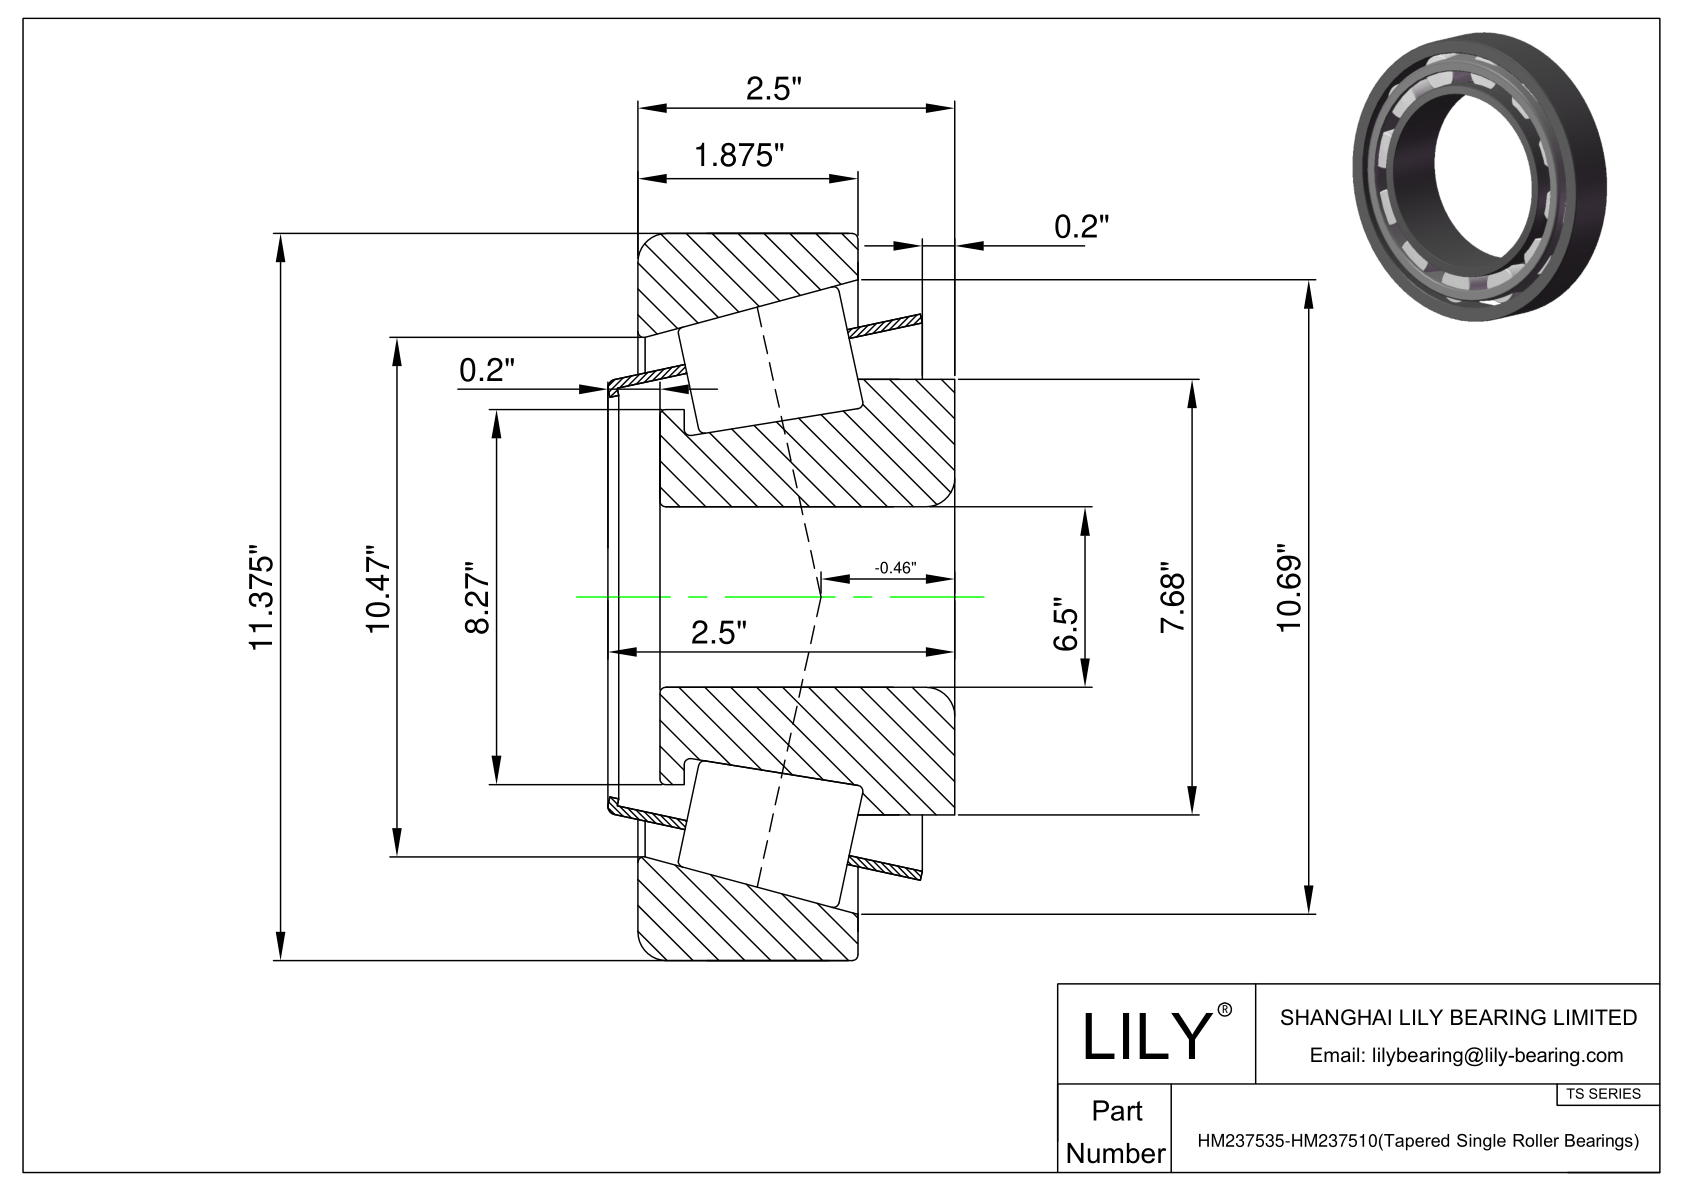 HM237535-HM237510 TS (Tapered Single Roller Bearings) (Imperial) cad drawing